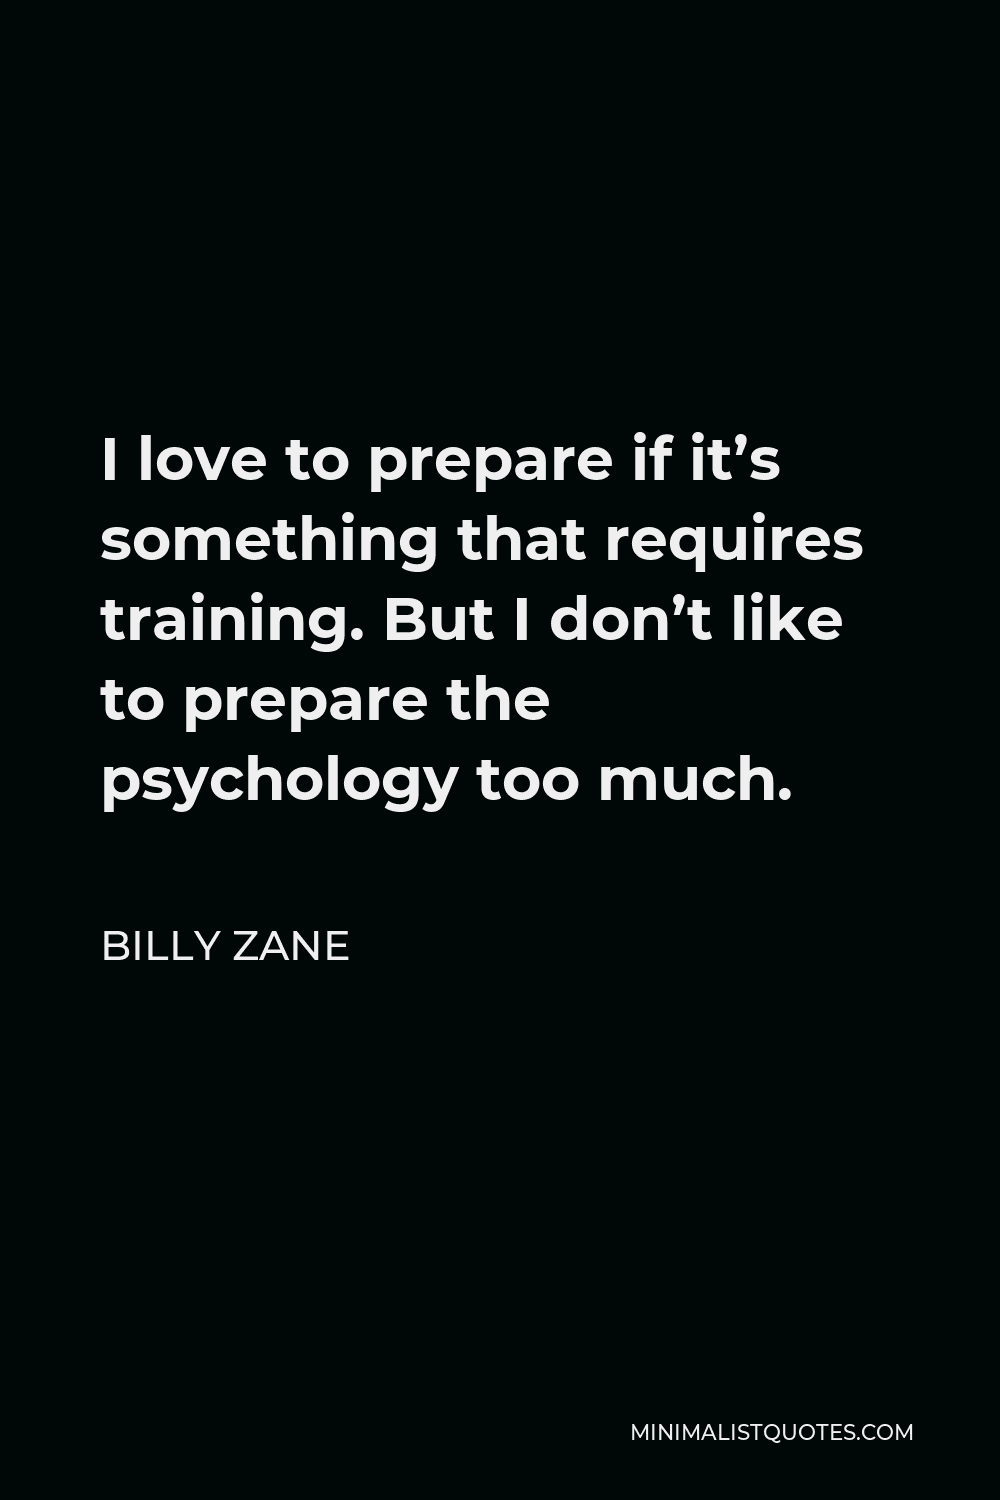 Billy Zane Quote - I love to prepare if it’s something that requires training. But I don’t like to prepare the psychology too much.